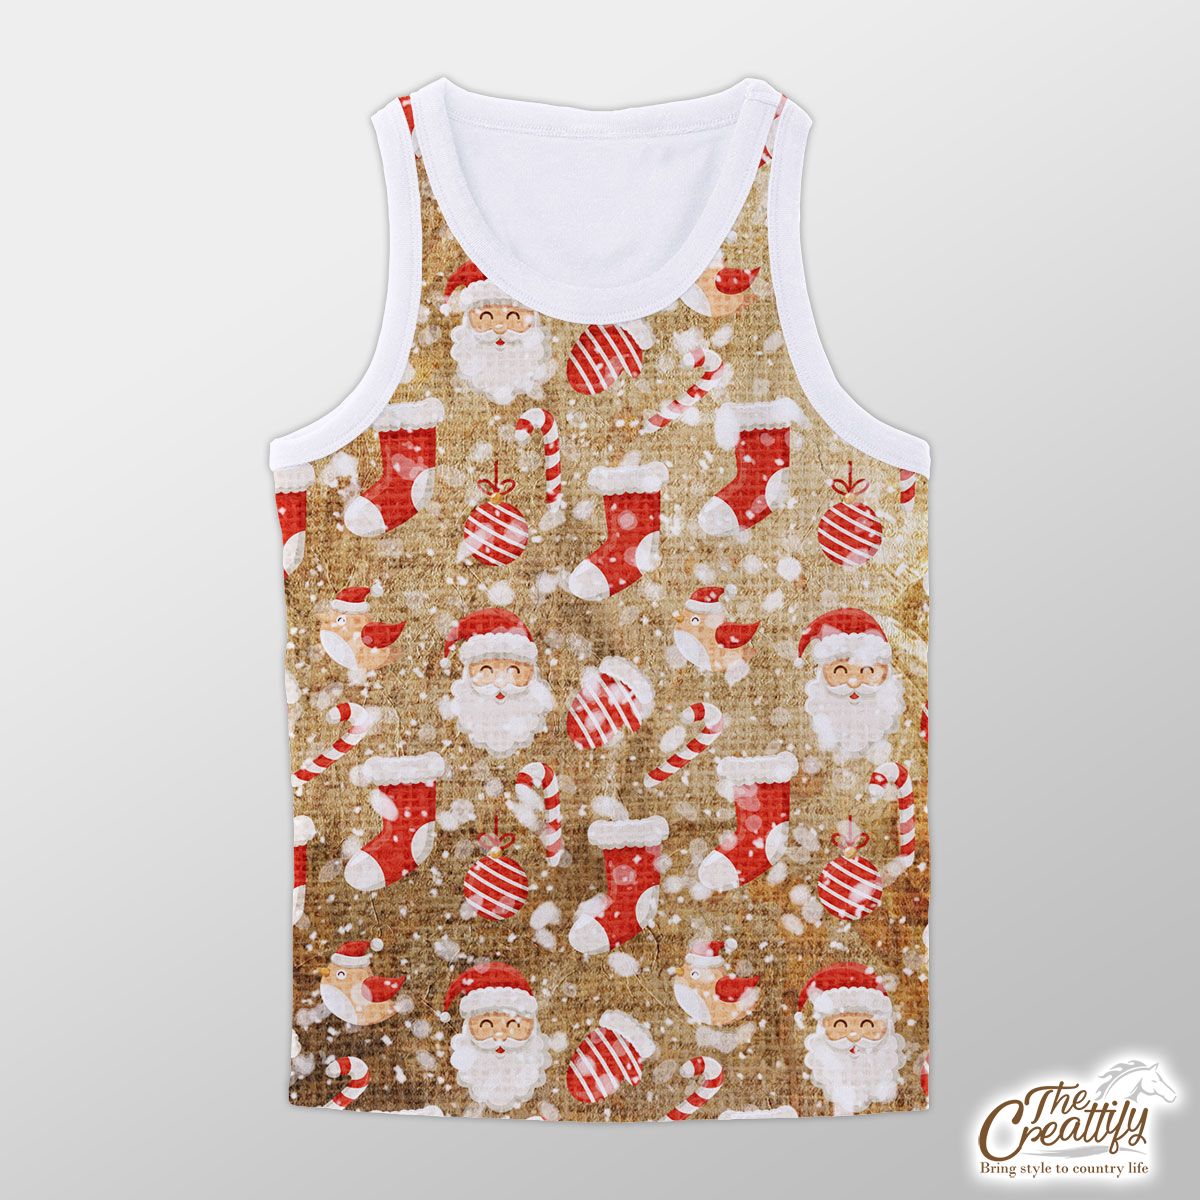 Santa Clause, Red Socks, Candy Canes And Cardinal Bird On Snowflake Unisex Tank Top